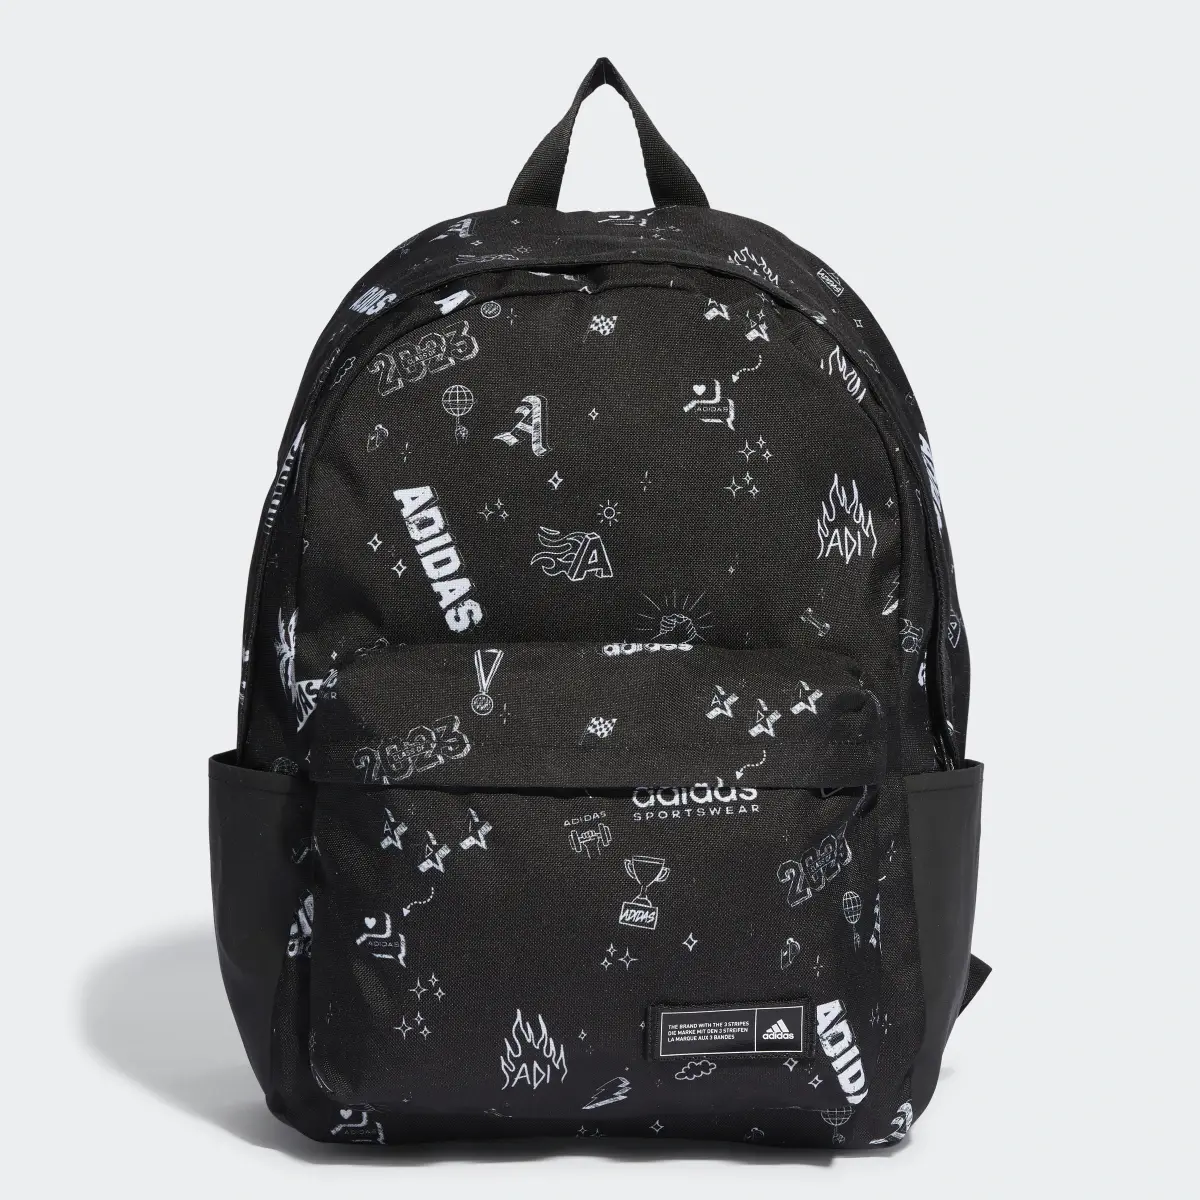 Adidas Classic Graphic Backpack. 1